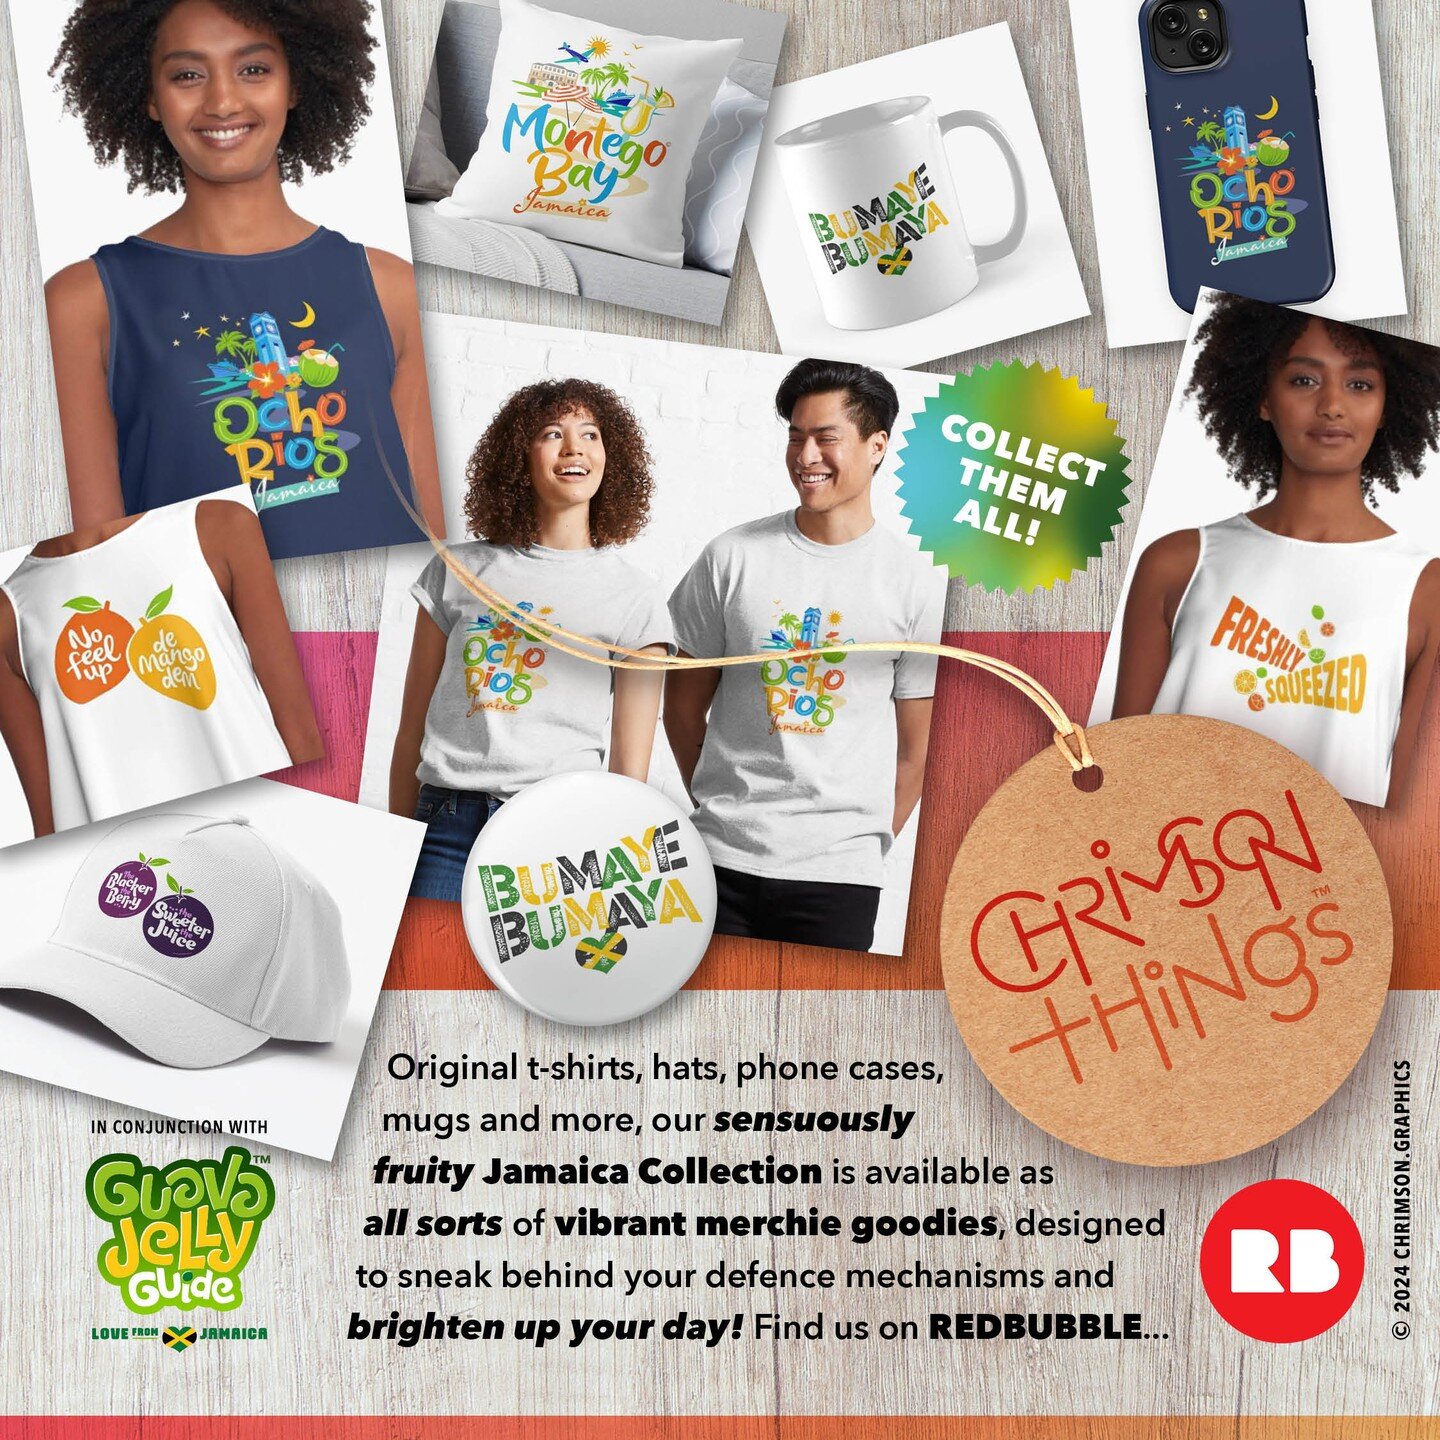 Original t-shirts, hats, phone cases, mugs and more, our sensuously fruity Jamaica Collection is available as all sorts of vibrant merchie goodies, designed to sneak behind your defence mechanisms and brighten up your day! Find us on REDBUBBLE...

re